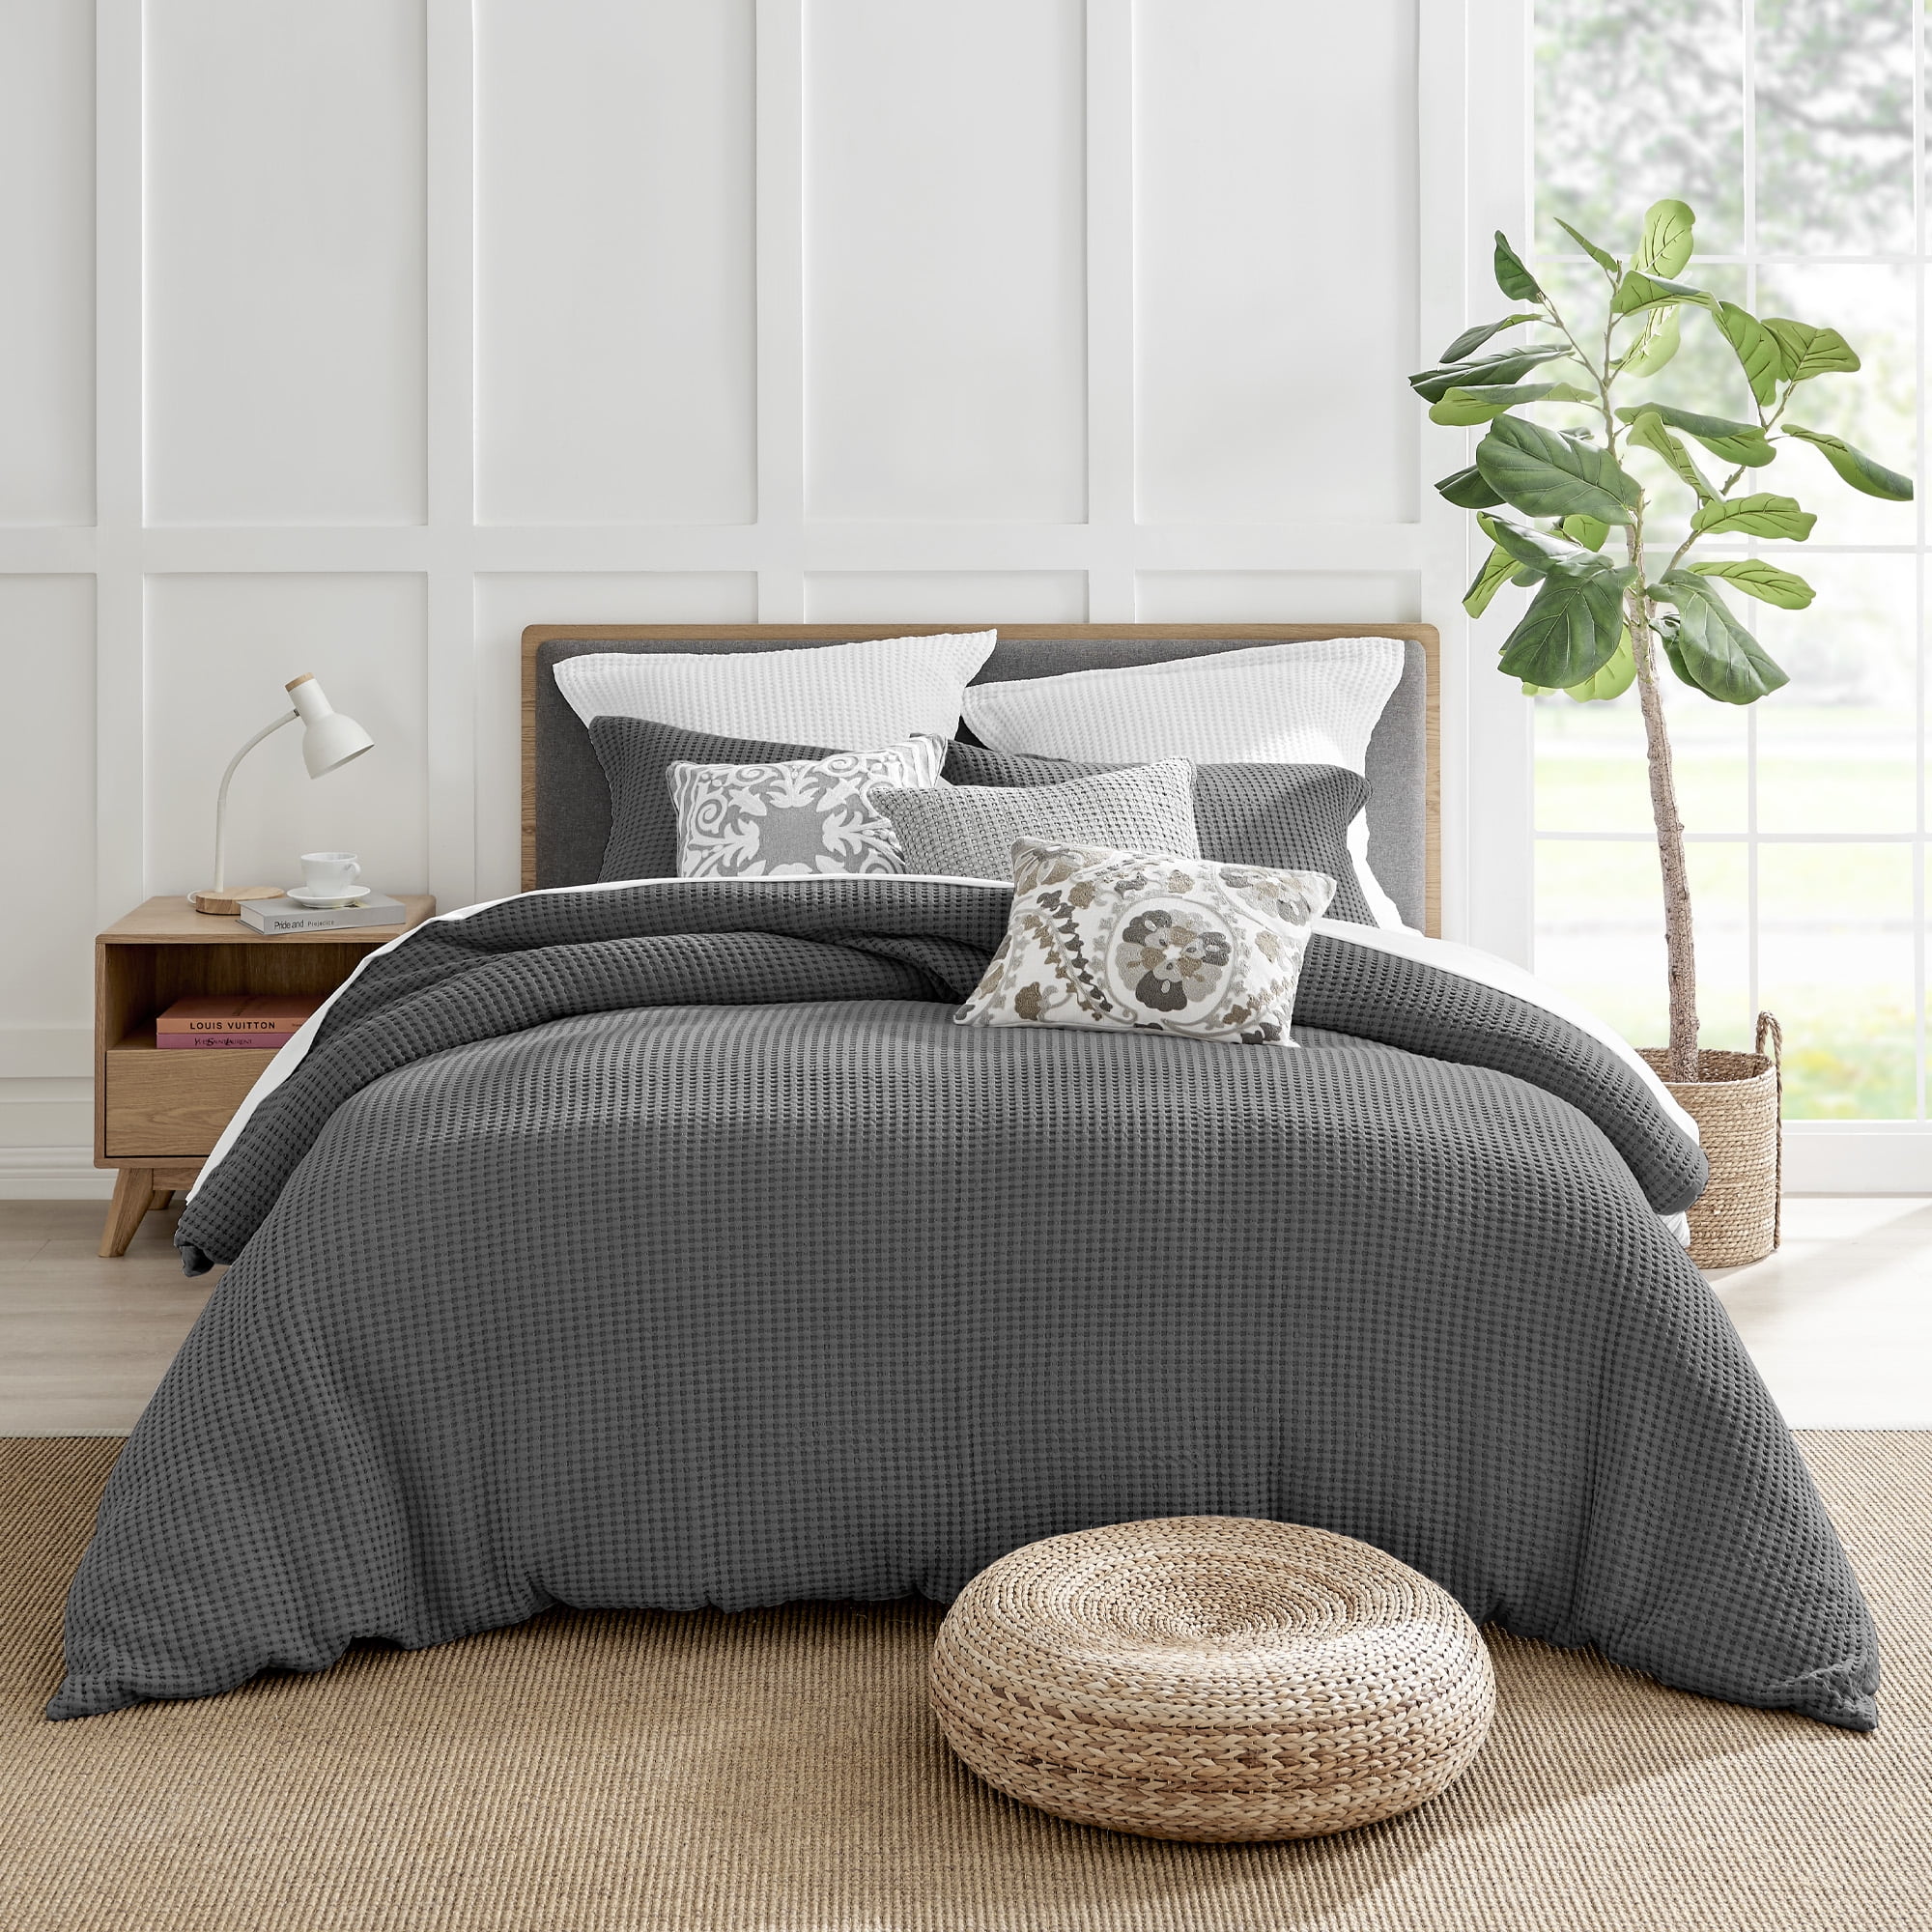 Levtex Home - Mills Waffle Charcoal Duvet Cover Set - King Duvet Cover +  Two King Pillow Cases - Charcoal Waffle Weave - Duvet Cover (106 x 94in.)  and Pillow Case (36 x 20in. ) - Cotton 